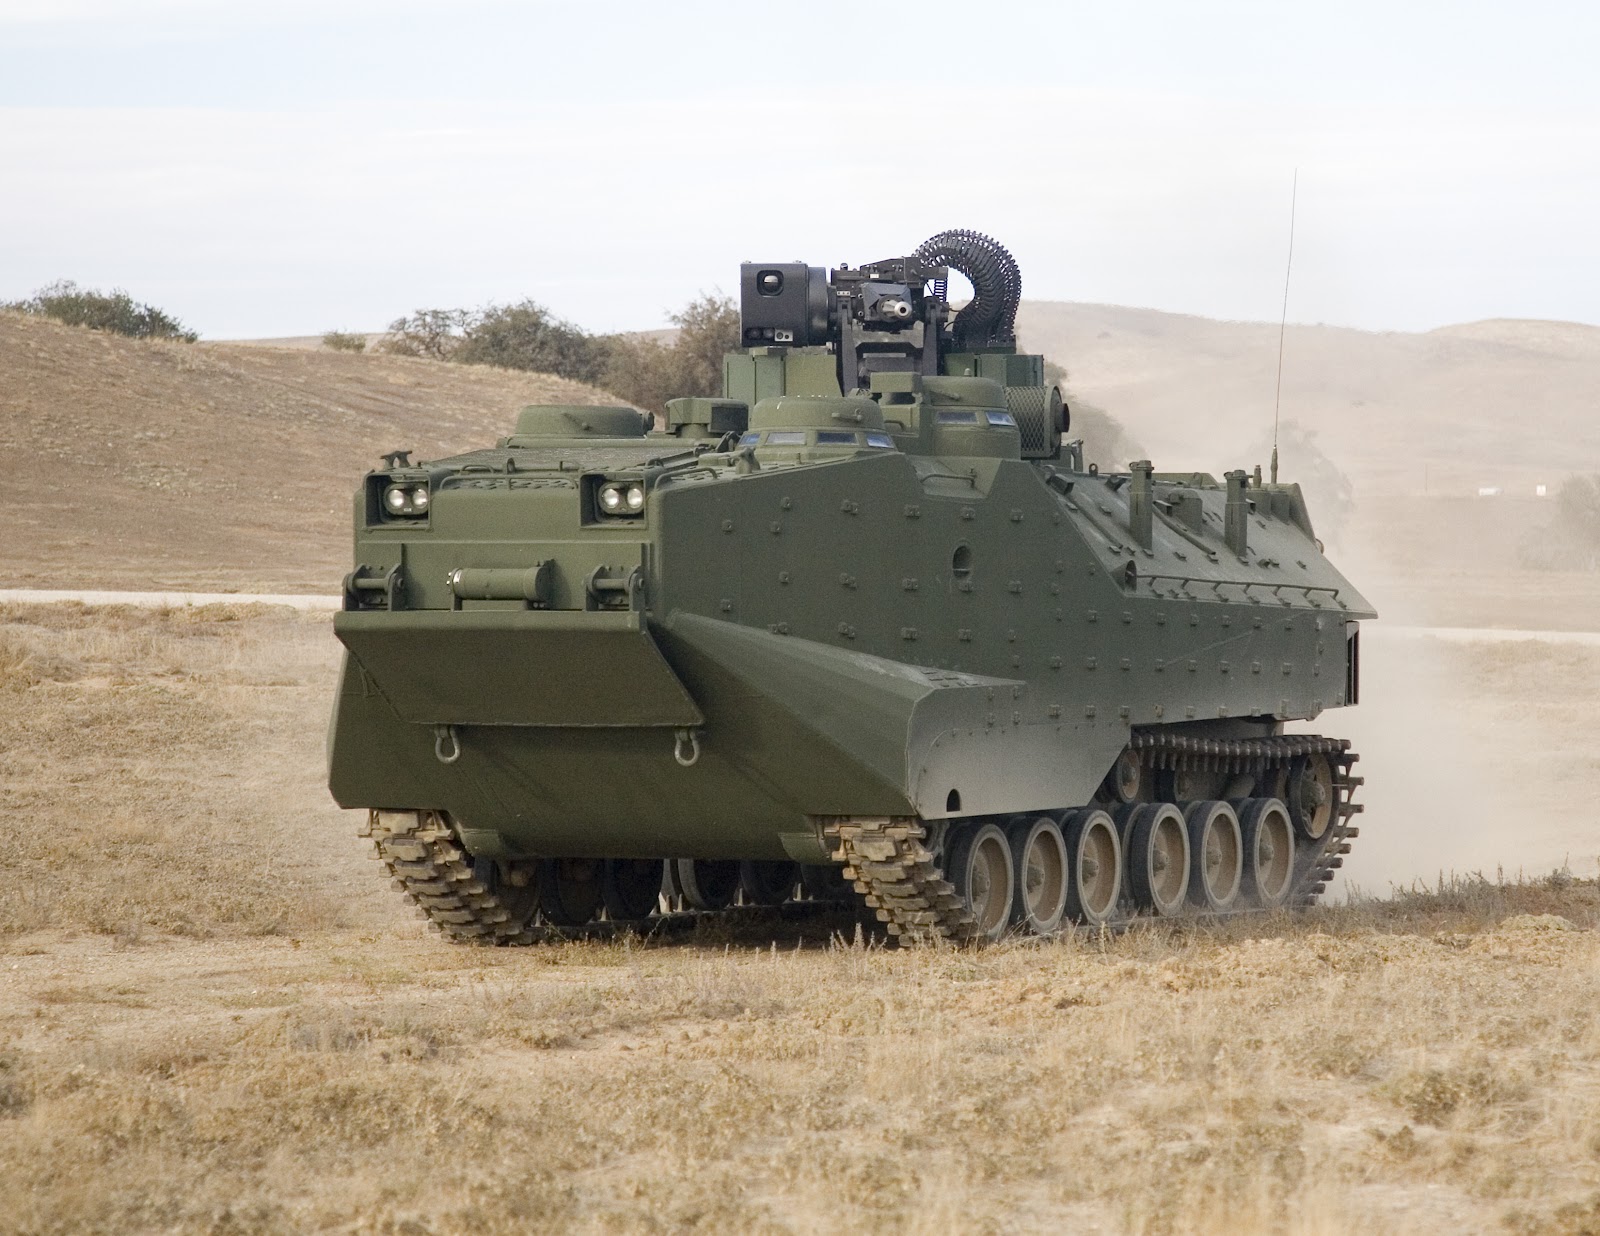 SNAFU!: Is the only replacement for the AAV a modernized 